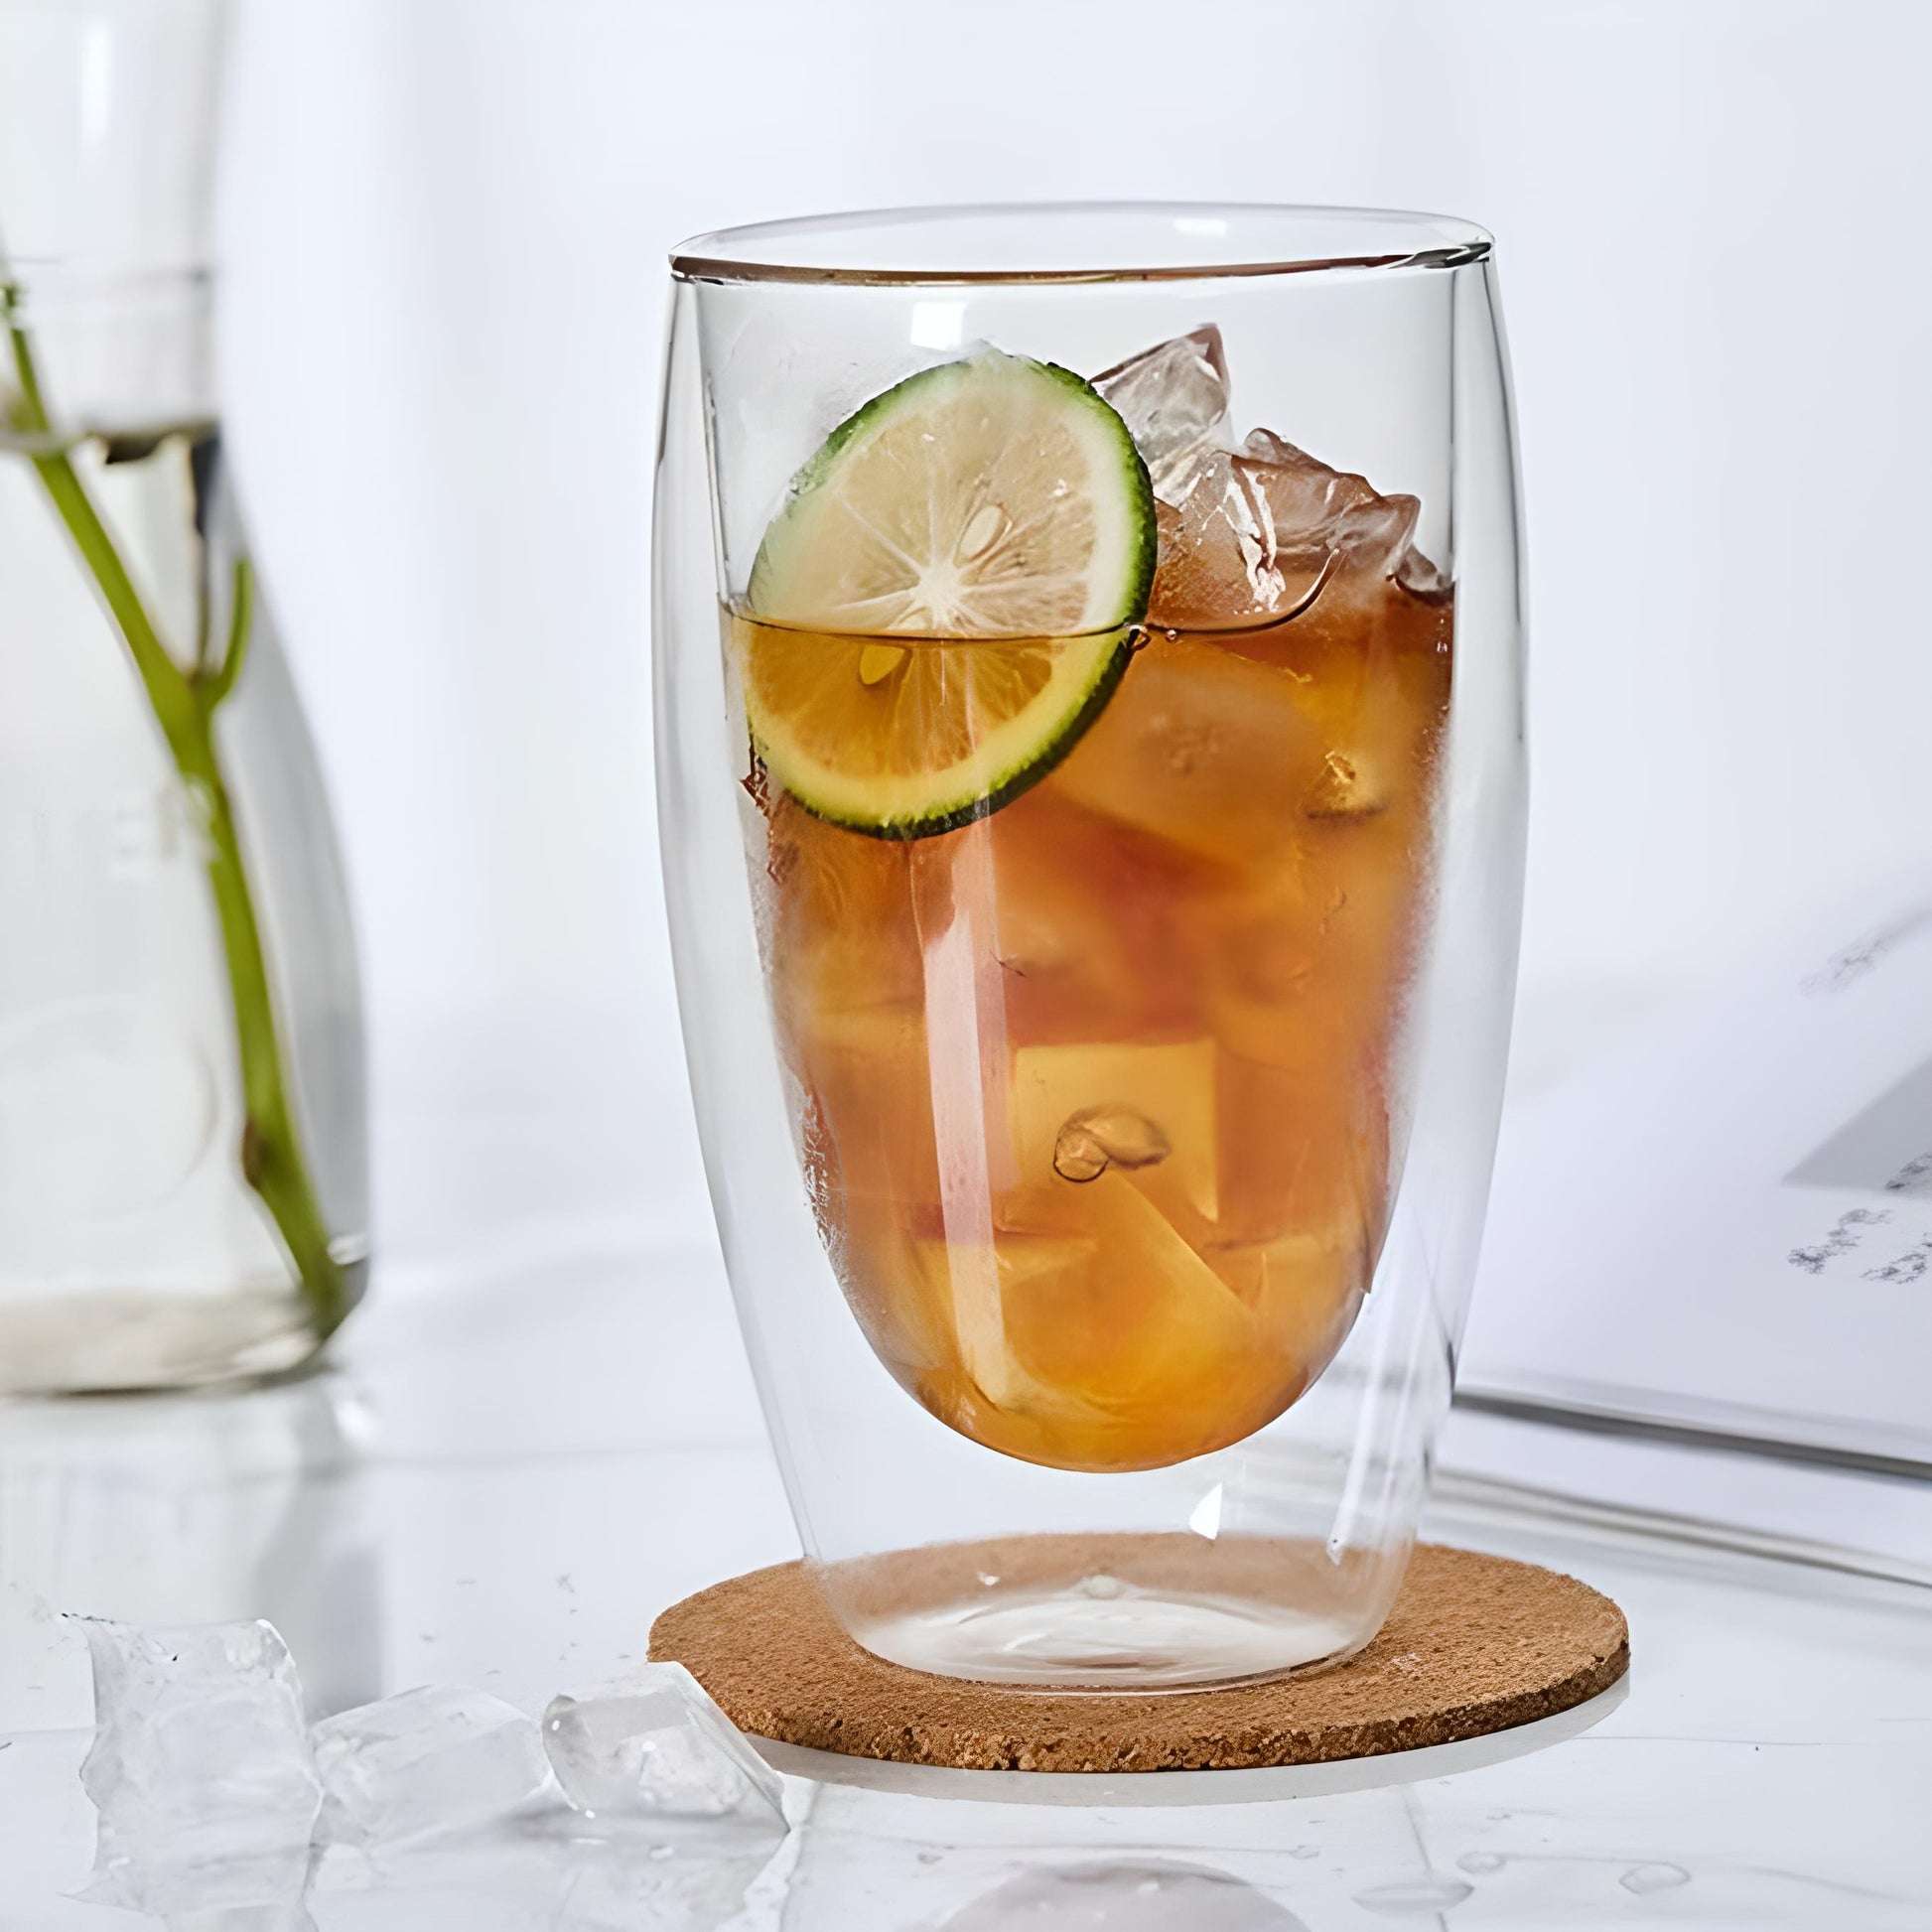 A single double wall glass with ice and fizzy drink in it